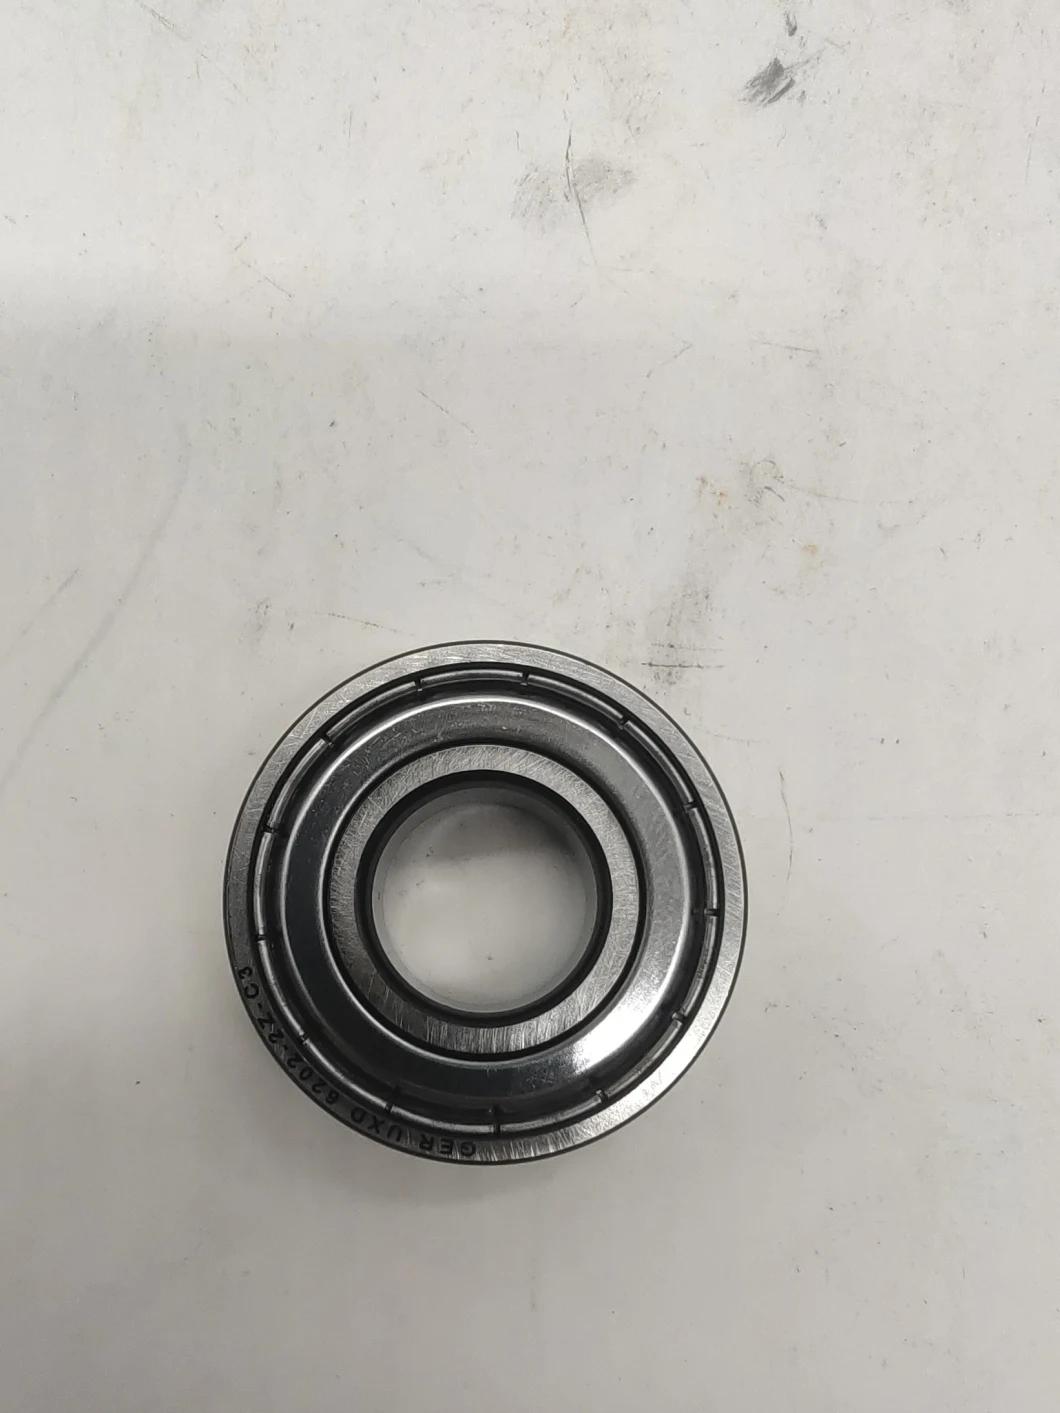 Deep Groove Ball Bearing 6202z Motorcycle Engine Parts